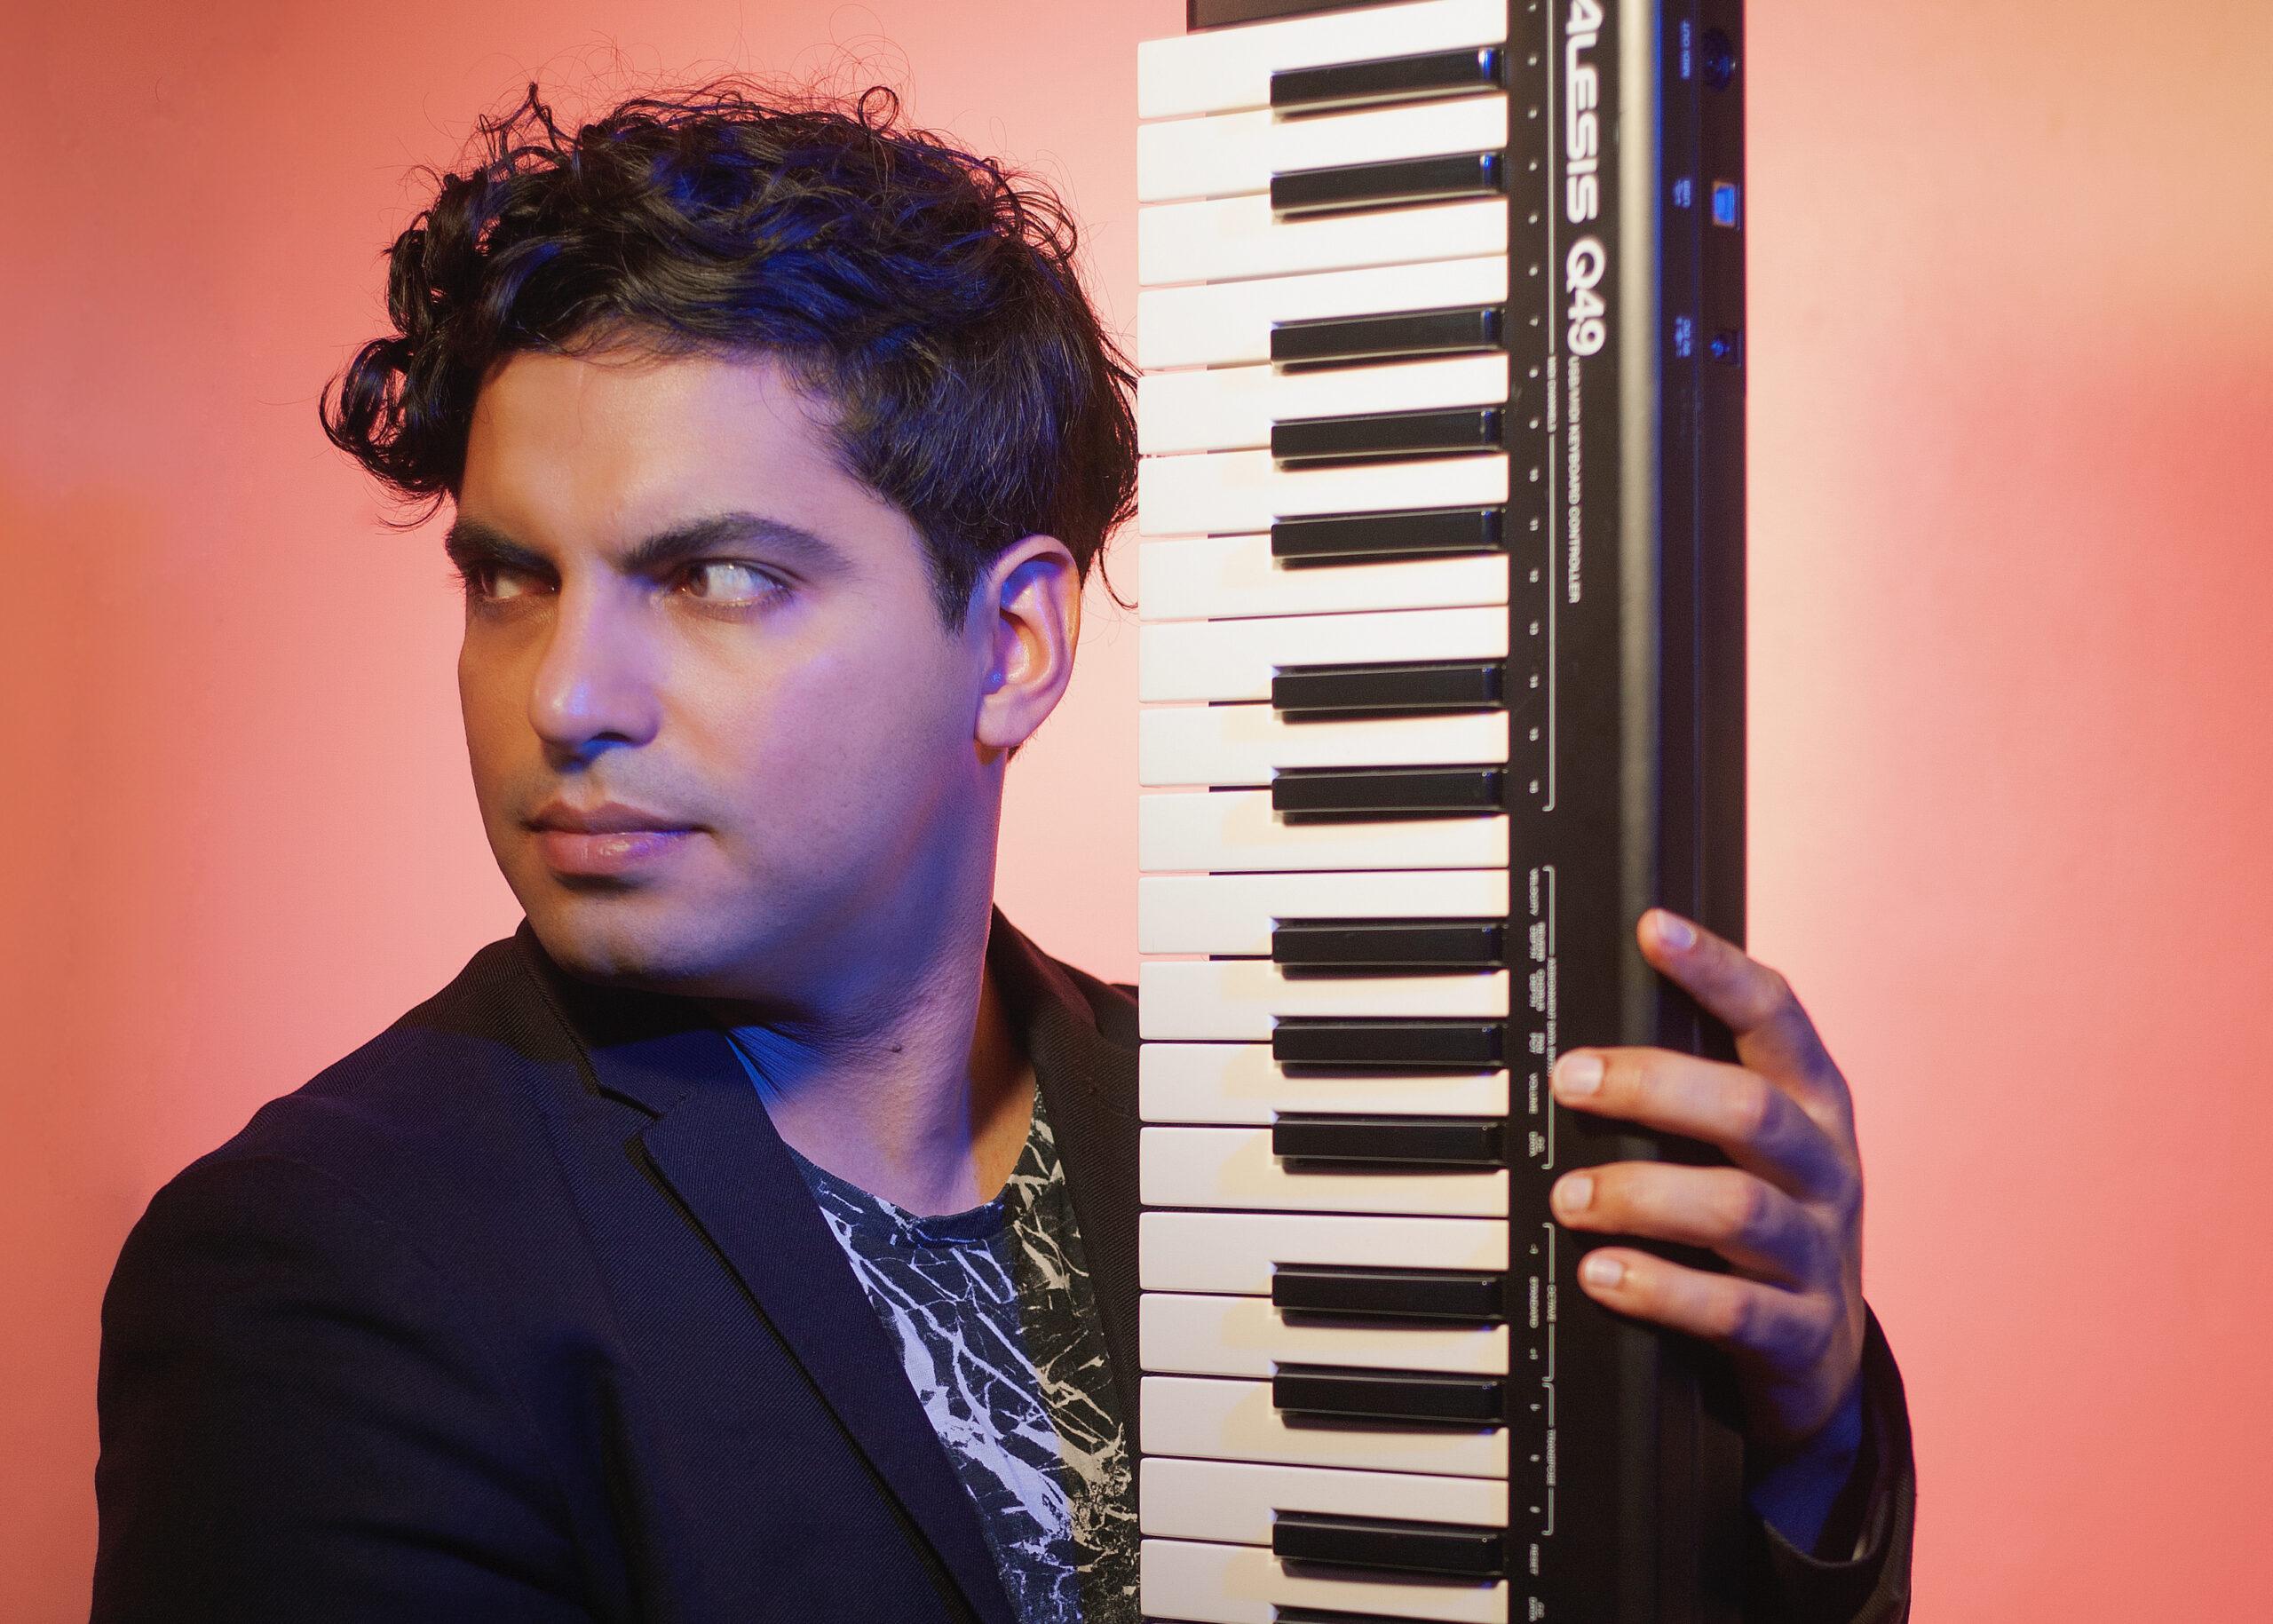 The artist Zubin Kanga holds a keyboard infront of a peach coloured background. 